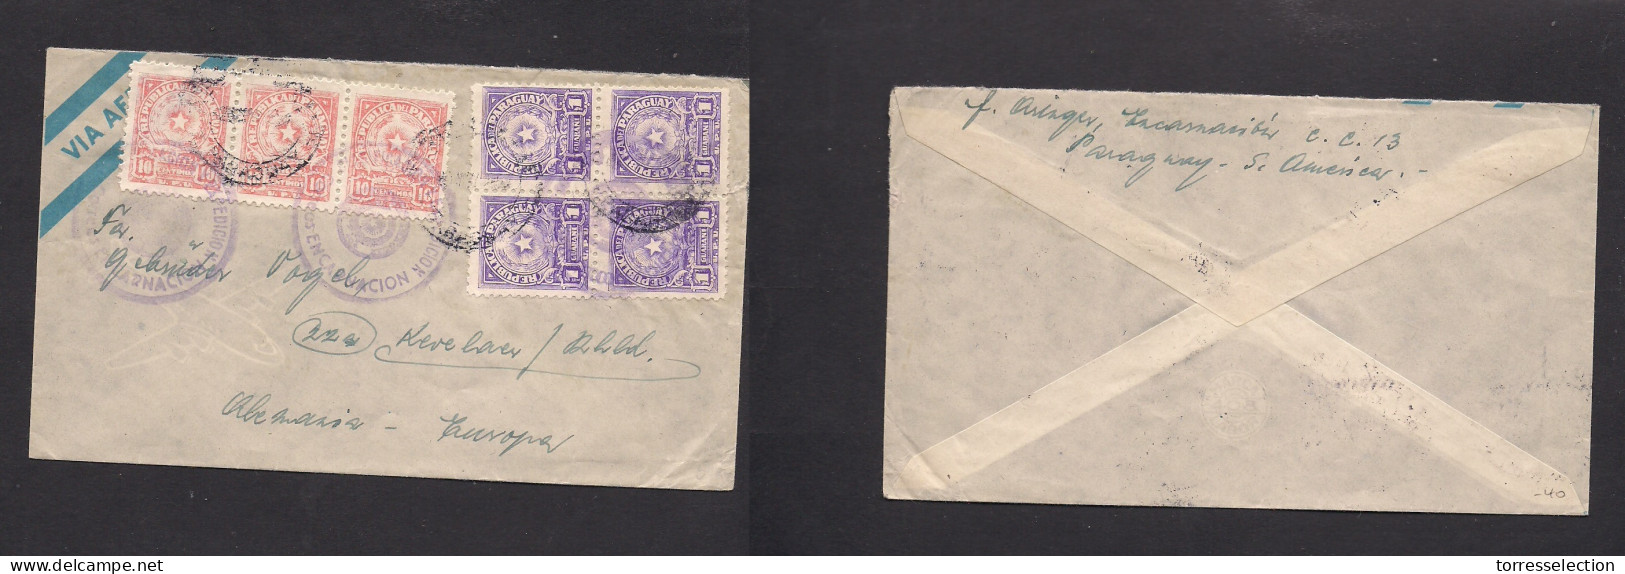 PARAGUAY. 1954. Encarnacion - Germany, Kevelaer. Air Multifkd Env, With Lilac Provisional Cachets. Fine Usage. XSALE. - Paraguay